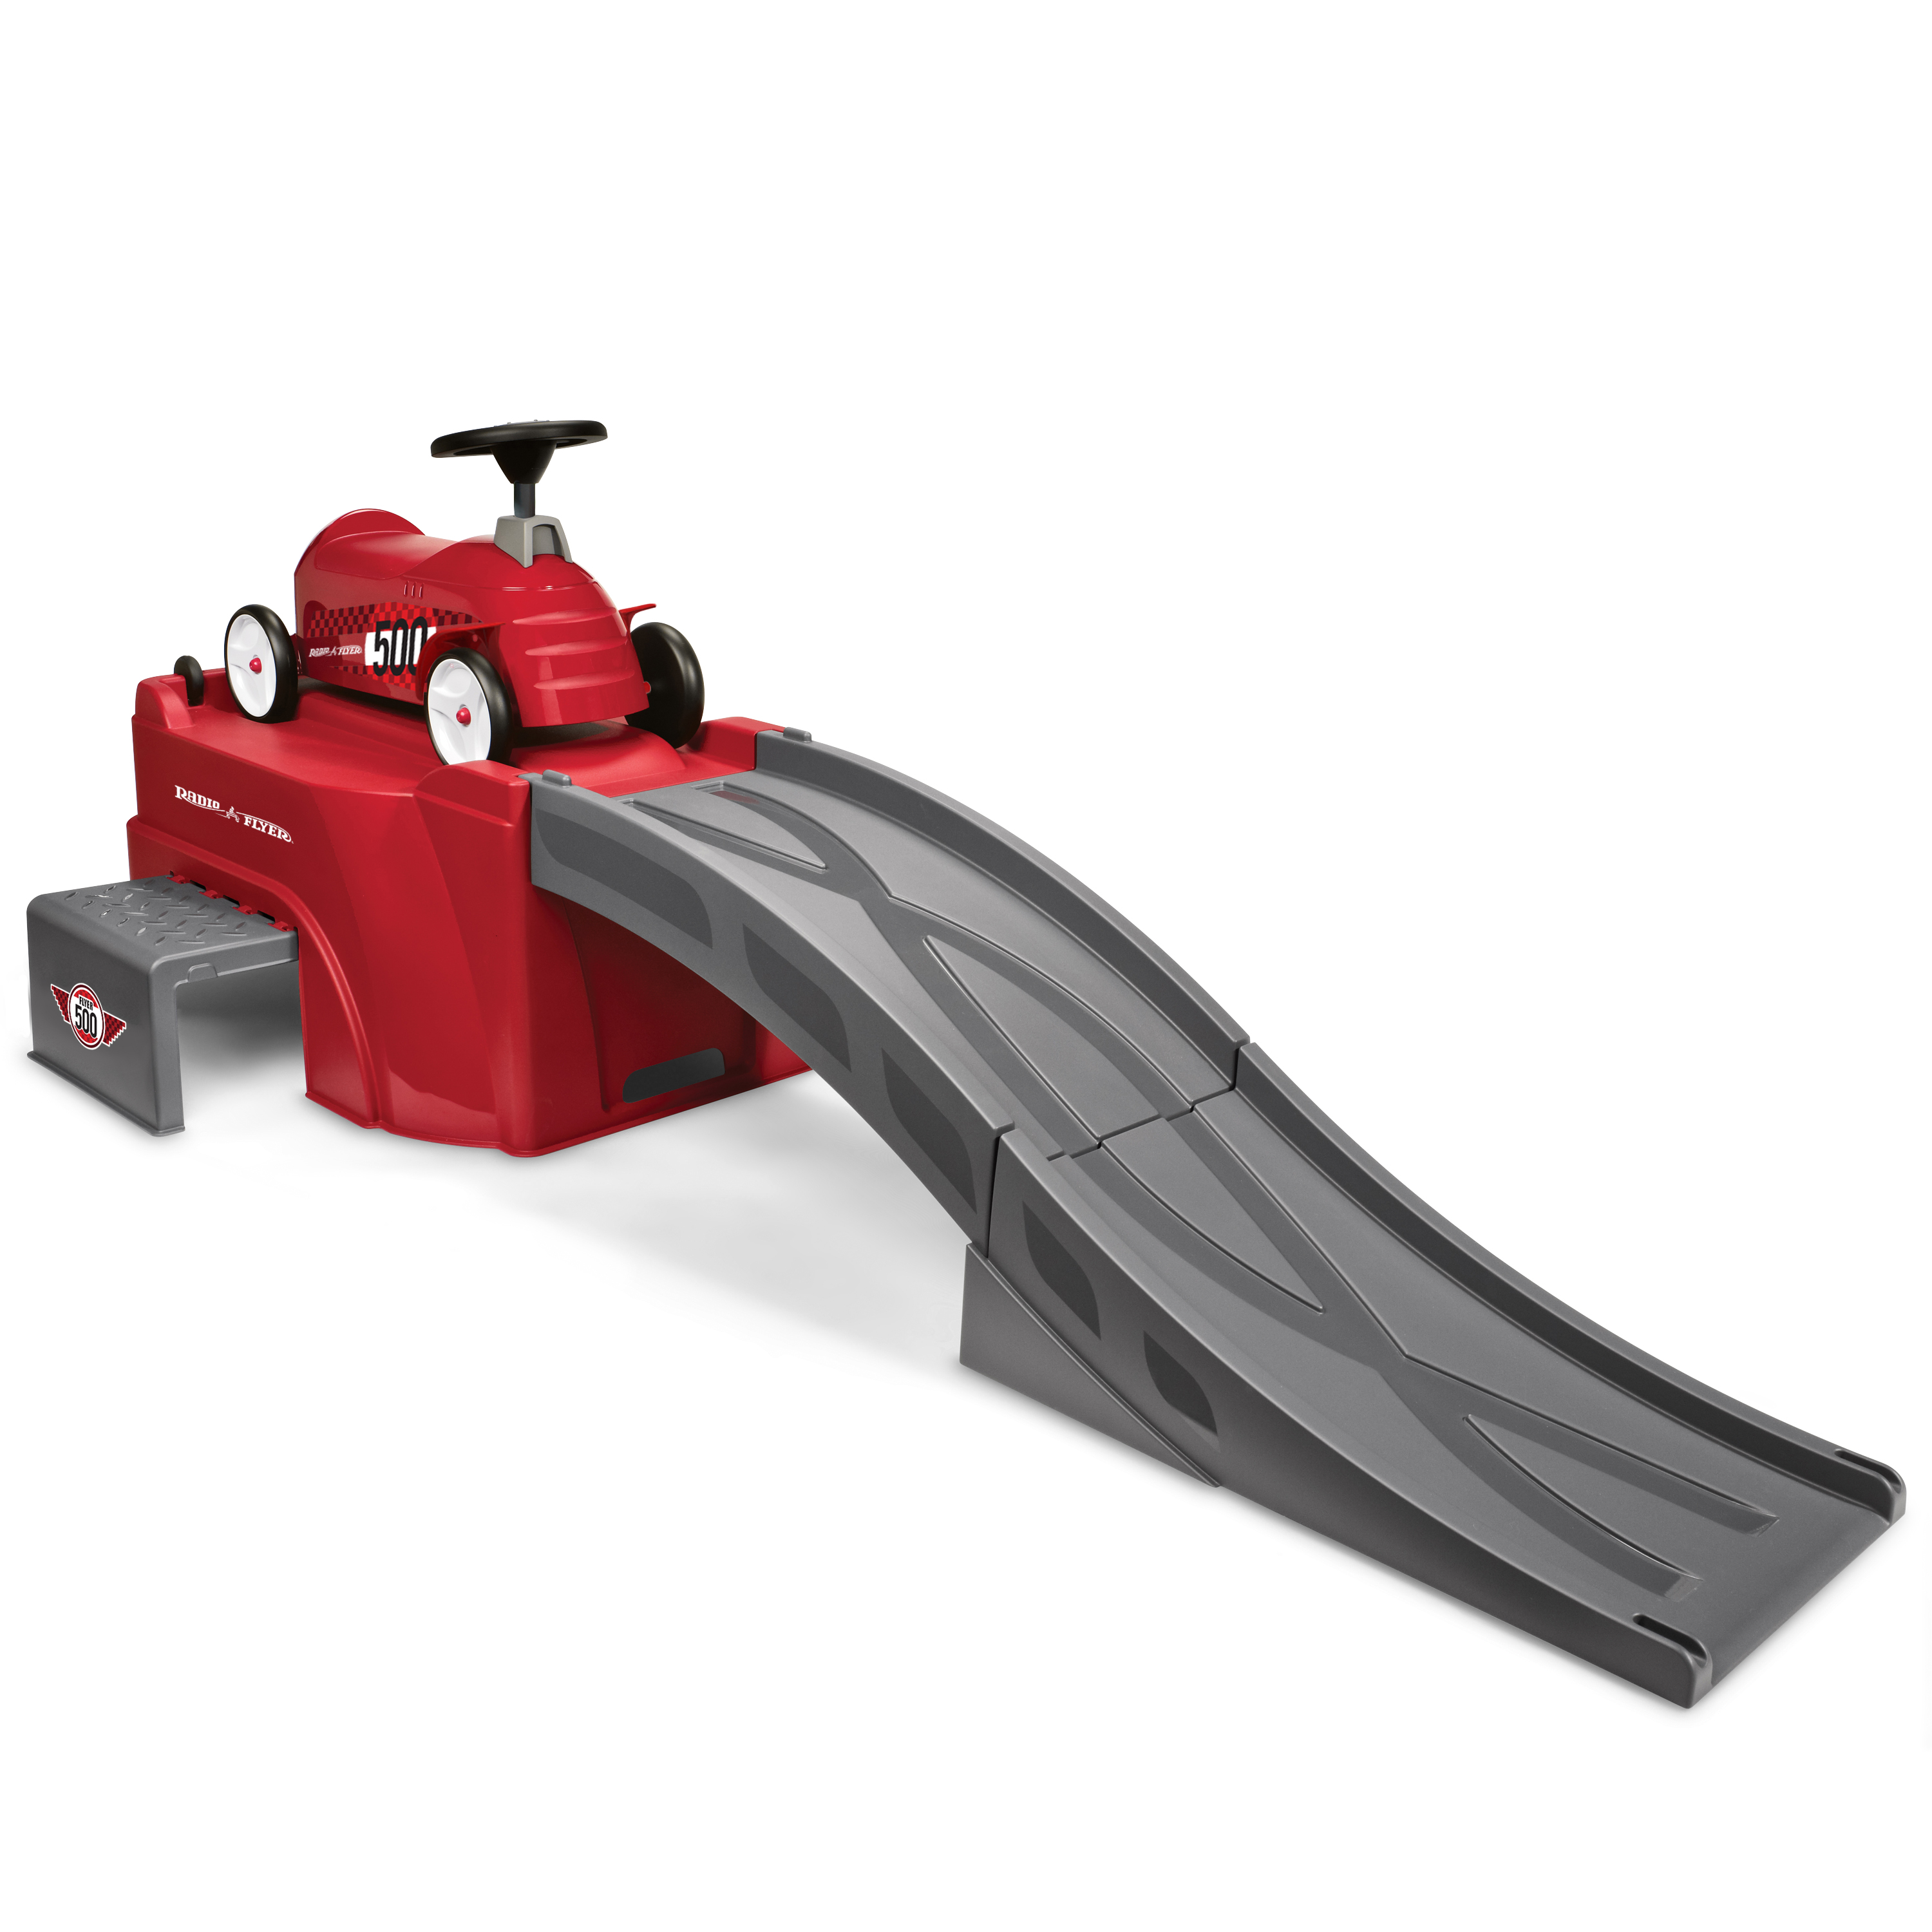 Radio Flyer, Flyer 500 Ride-on with Ramp and Car, Red - image 1 of 8